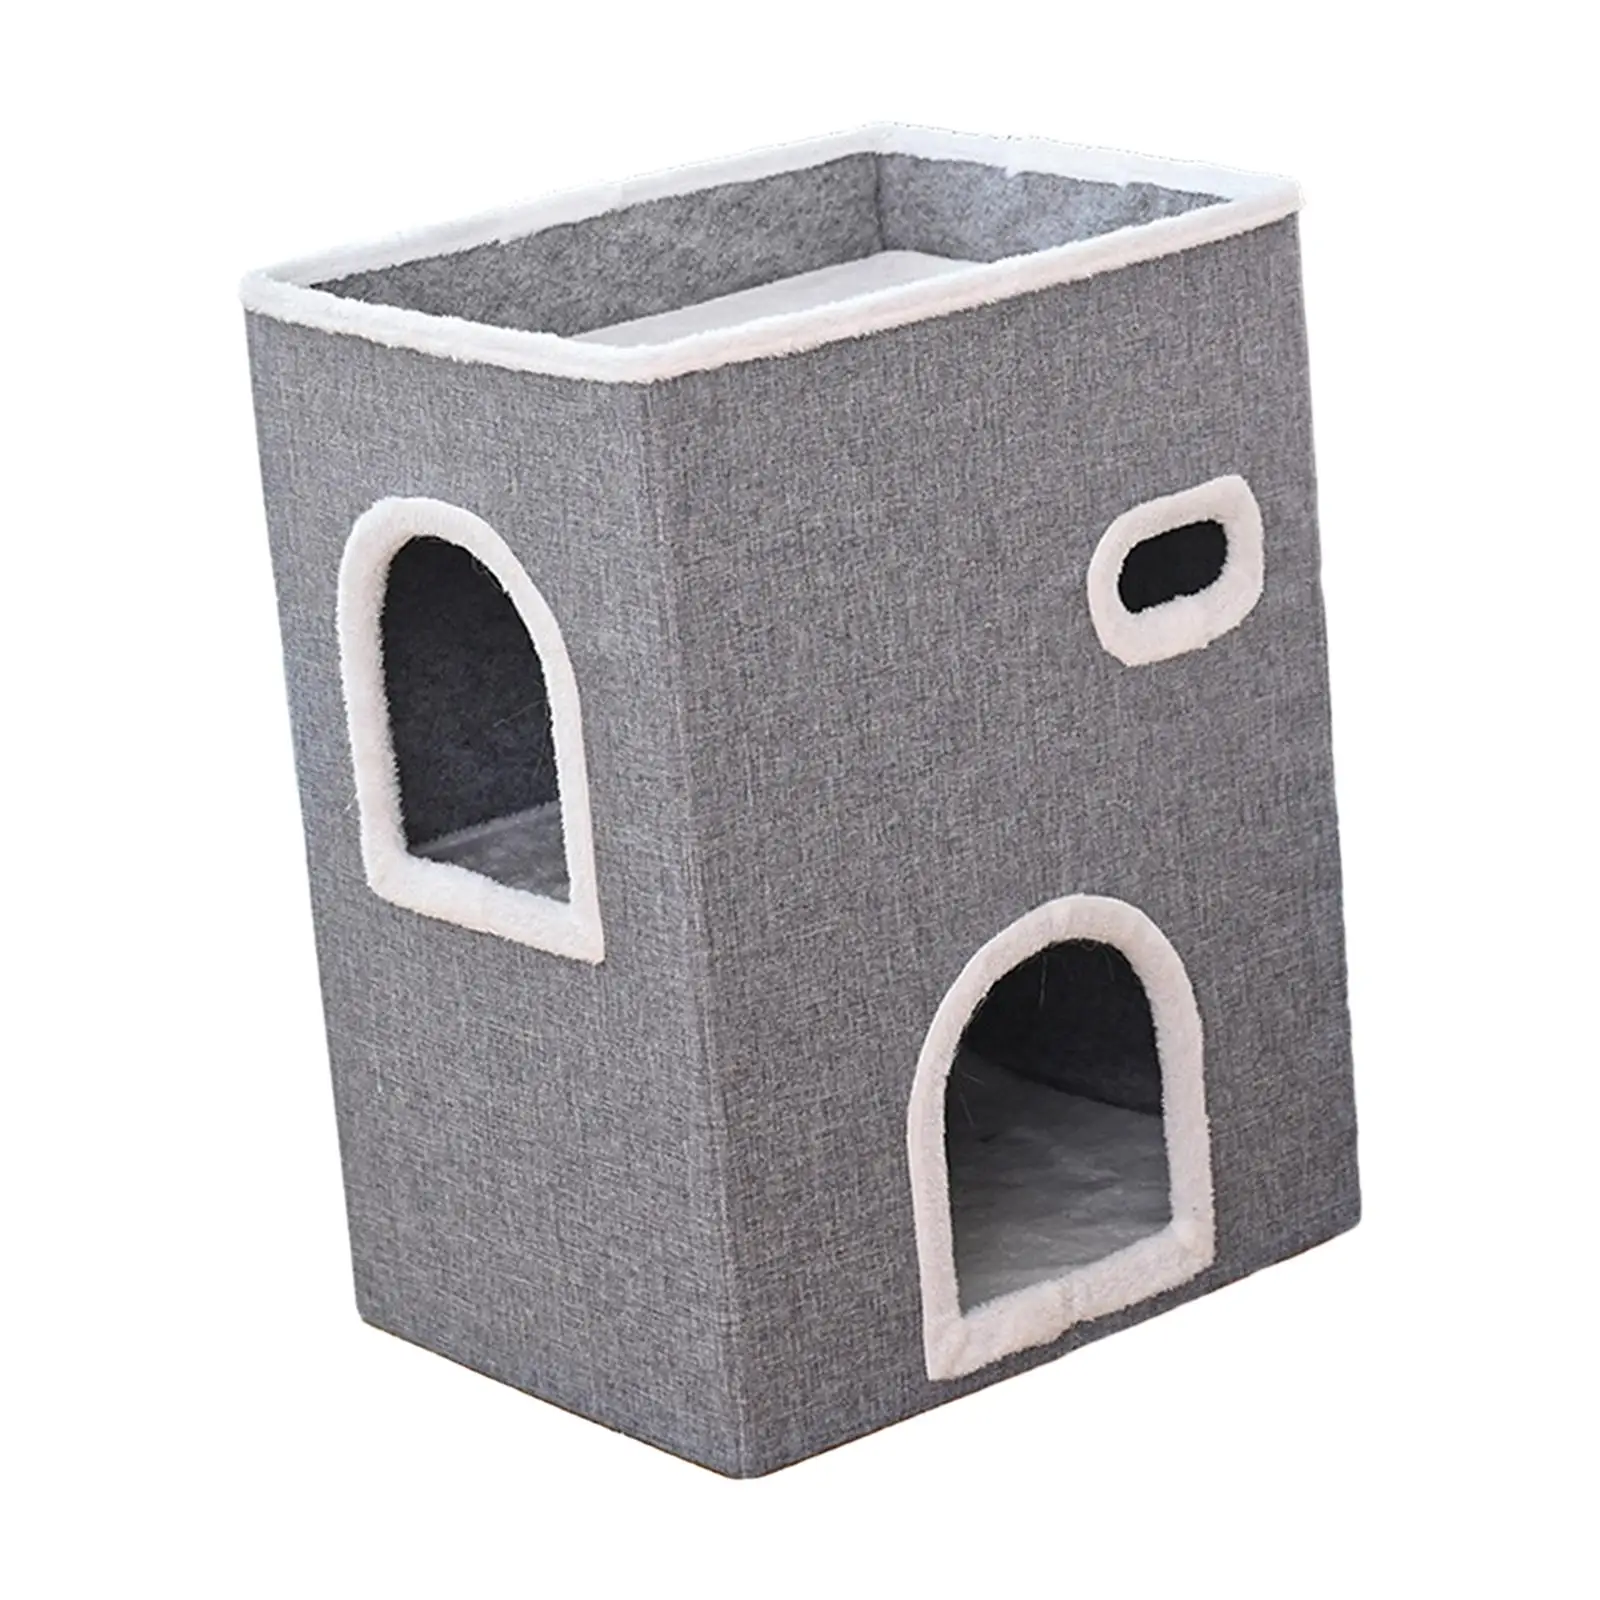 Foldable Cat Bed Sofa Bed Protector Multifunctional Home Decoration Stackable Cat Cube for Pet Supplies Climb Rest Exercising